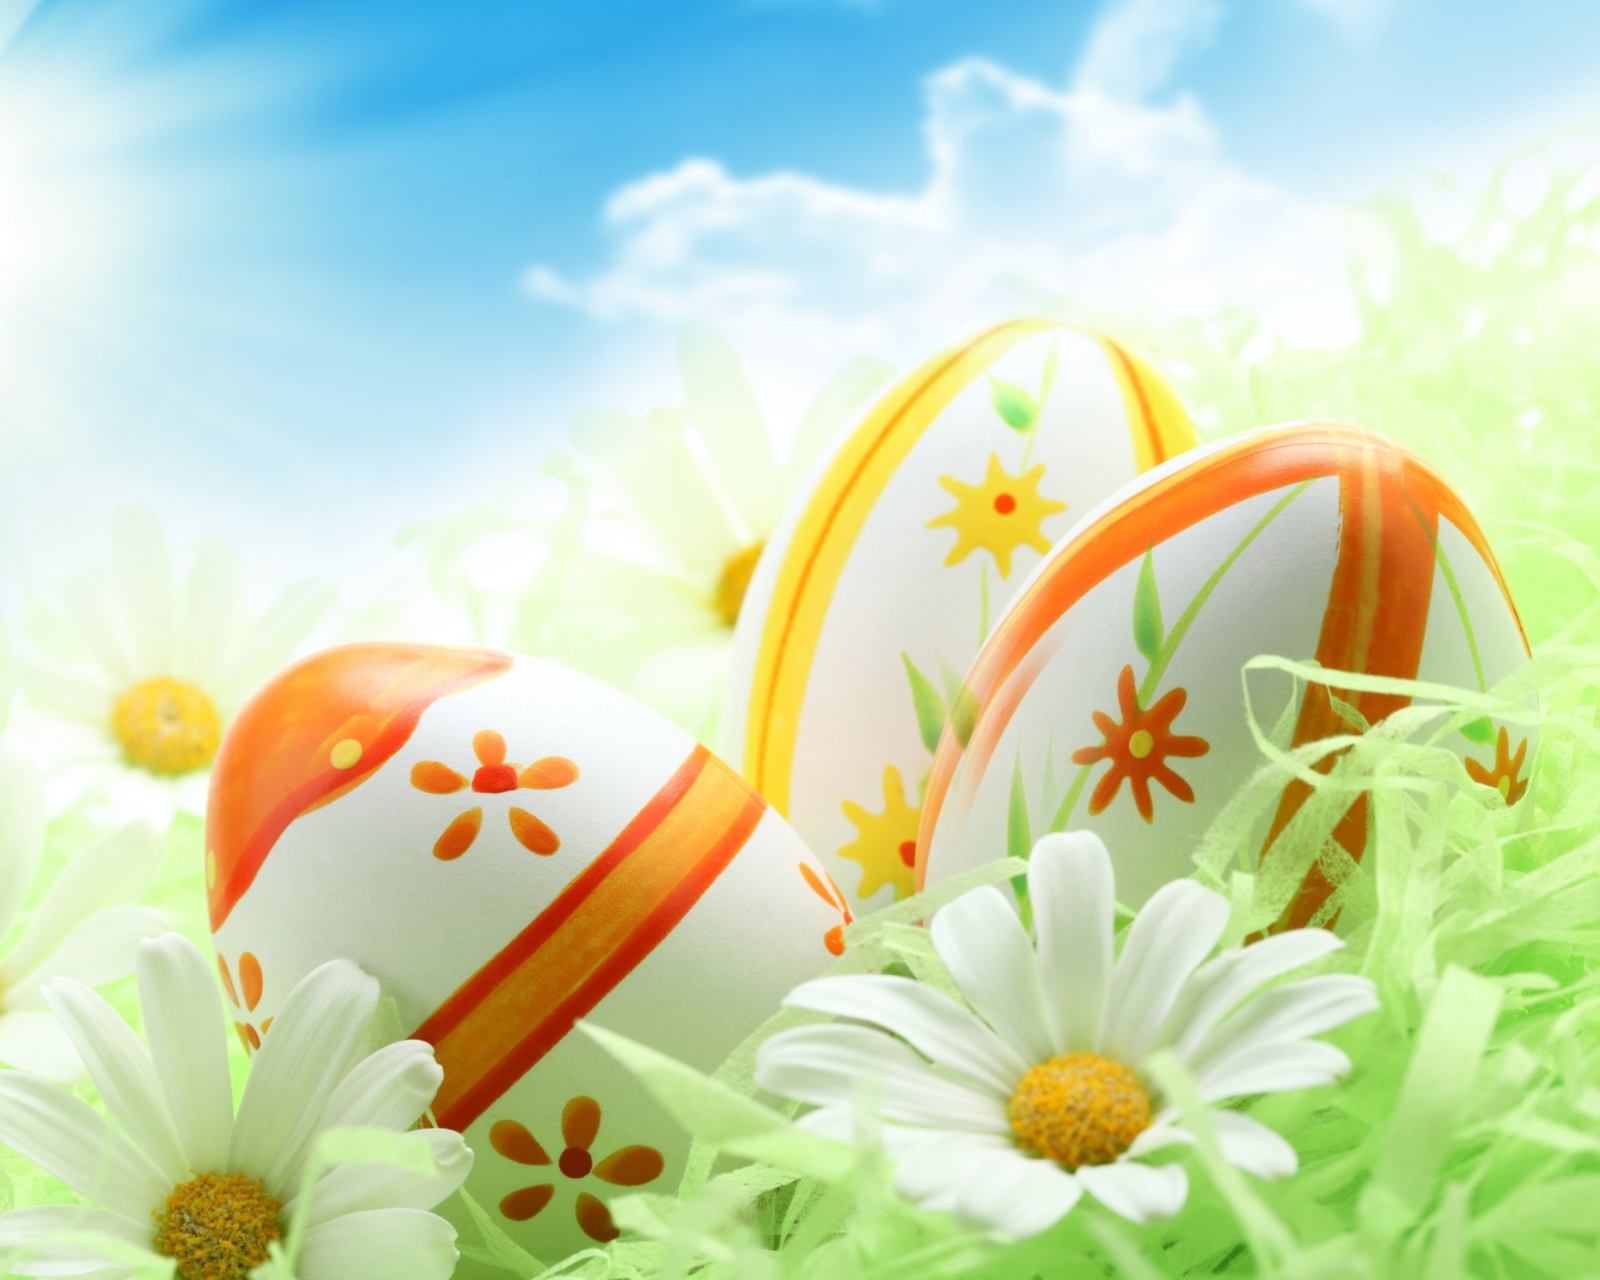 Easter Eggs And Daisies wallpaper 1600x1280